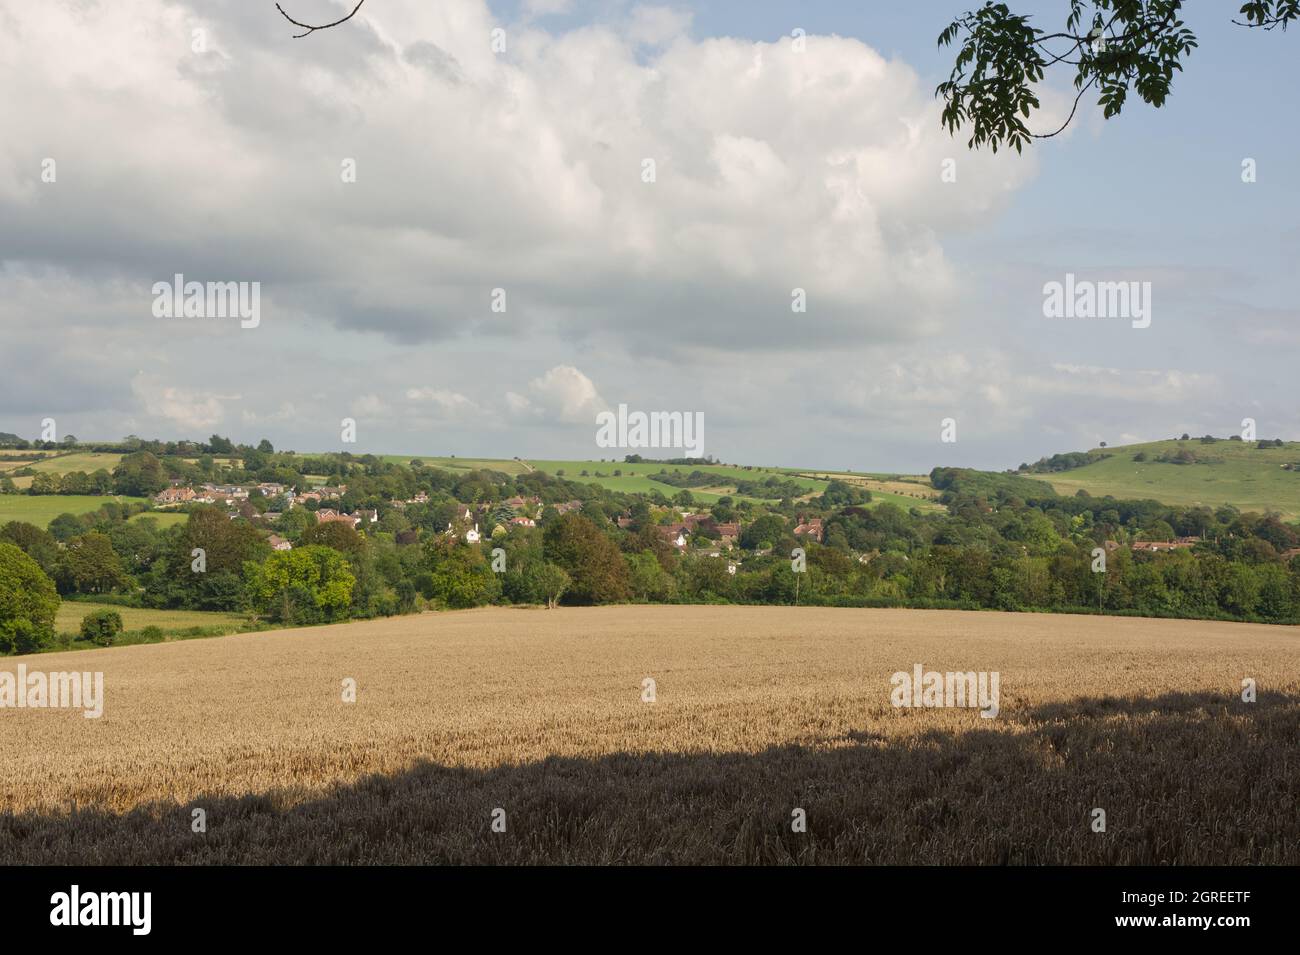 Countryside at Findon on the South Downs near Worthing, West Sussex, England. With ripe barley field, village and Cissbury Ring ancient hill fort. Stock Photo